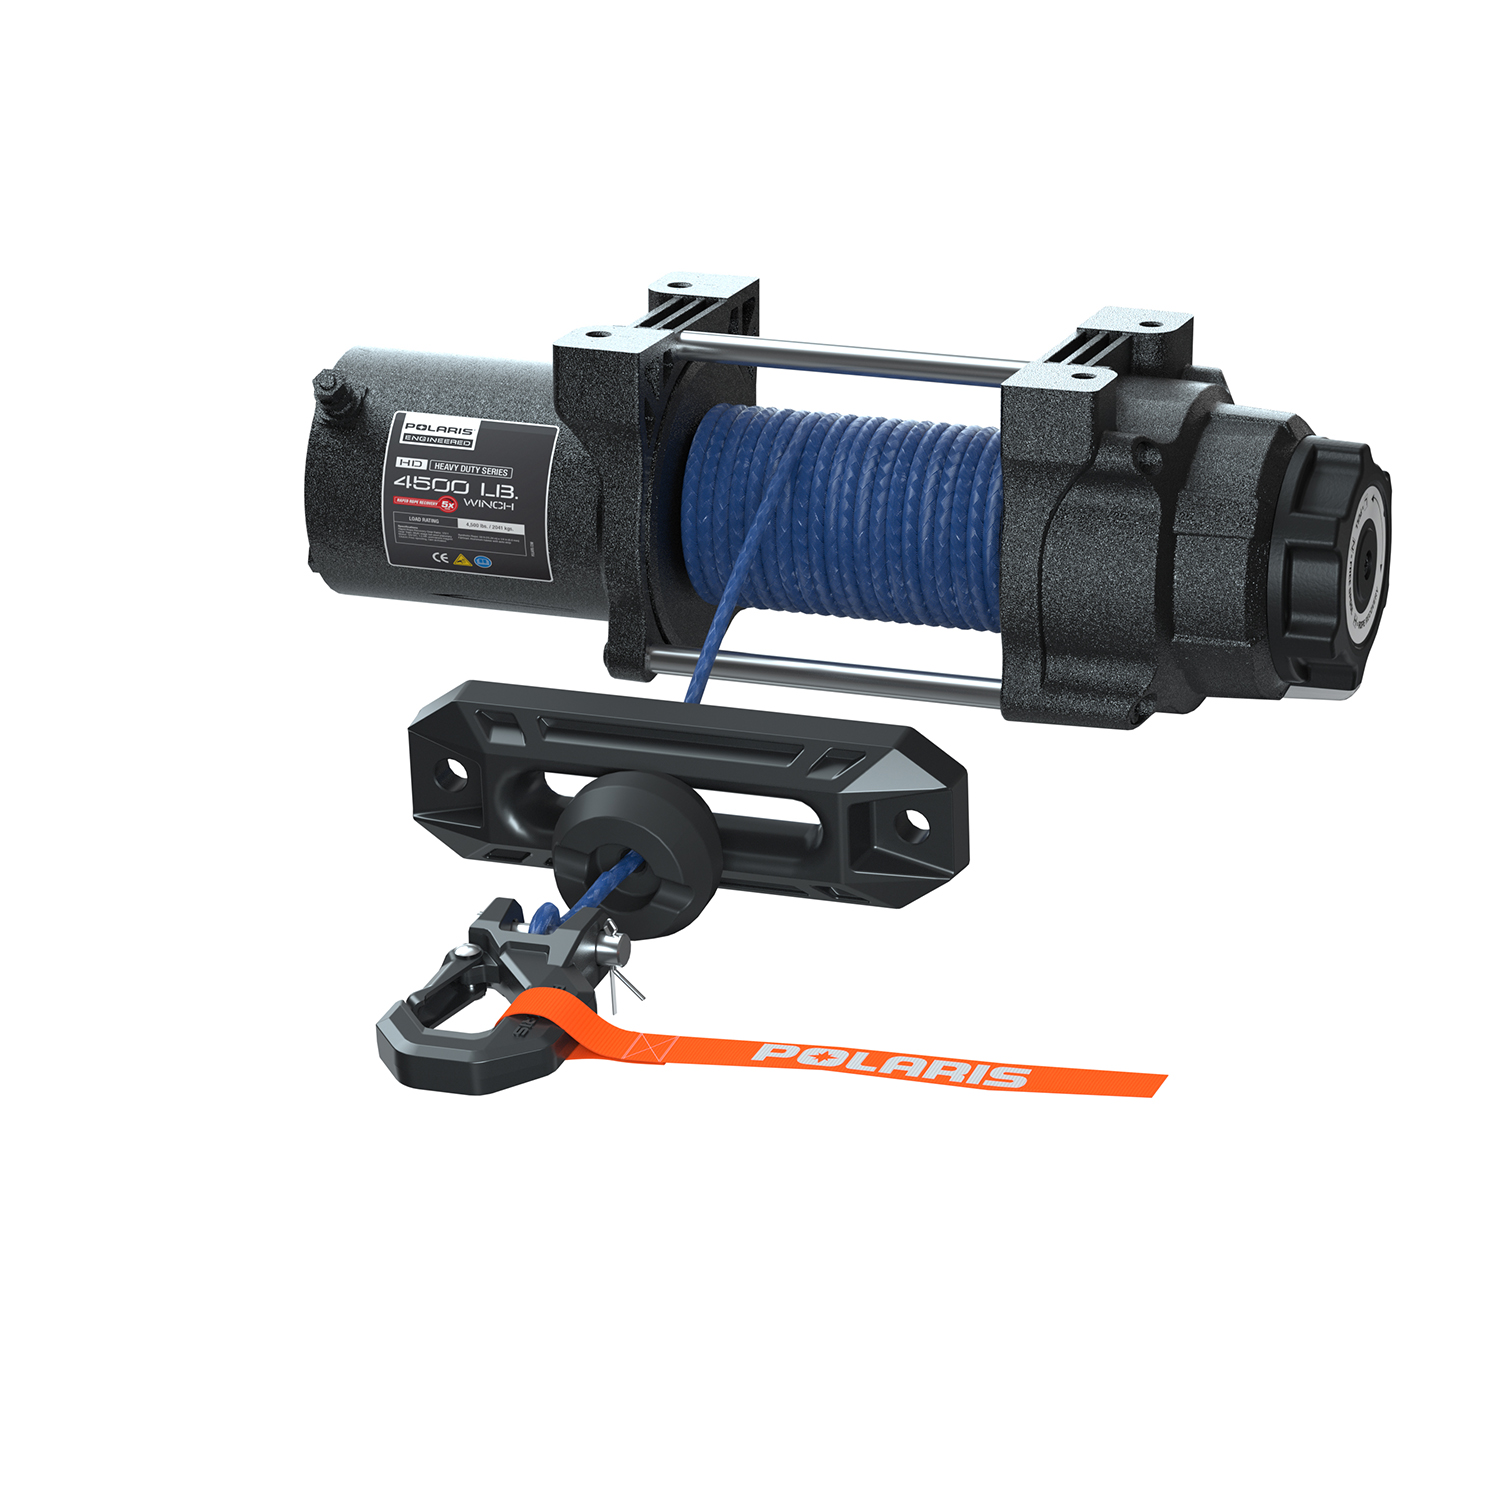 Polaris PRO HD 4,500 lb. Winch with Rapid Rope Recovery